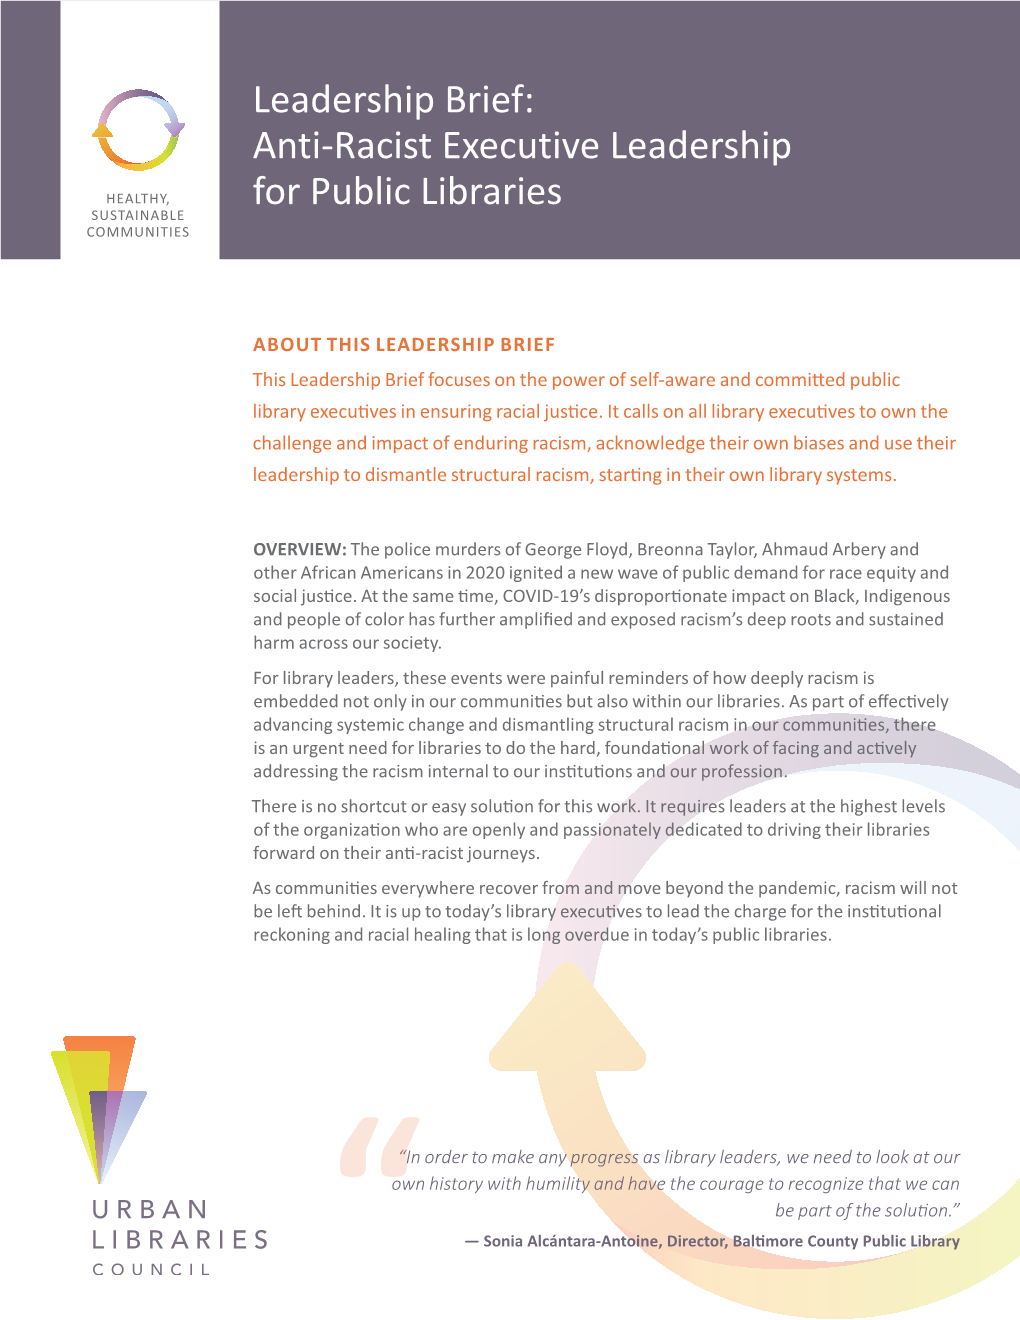 Anti-Racist Executive Leadership for Public Libraries